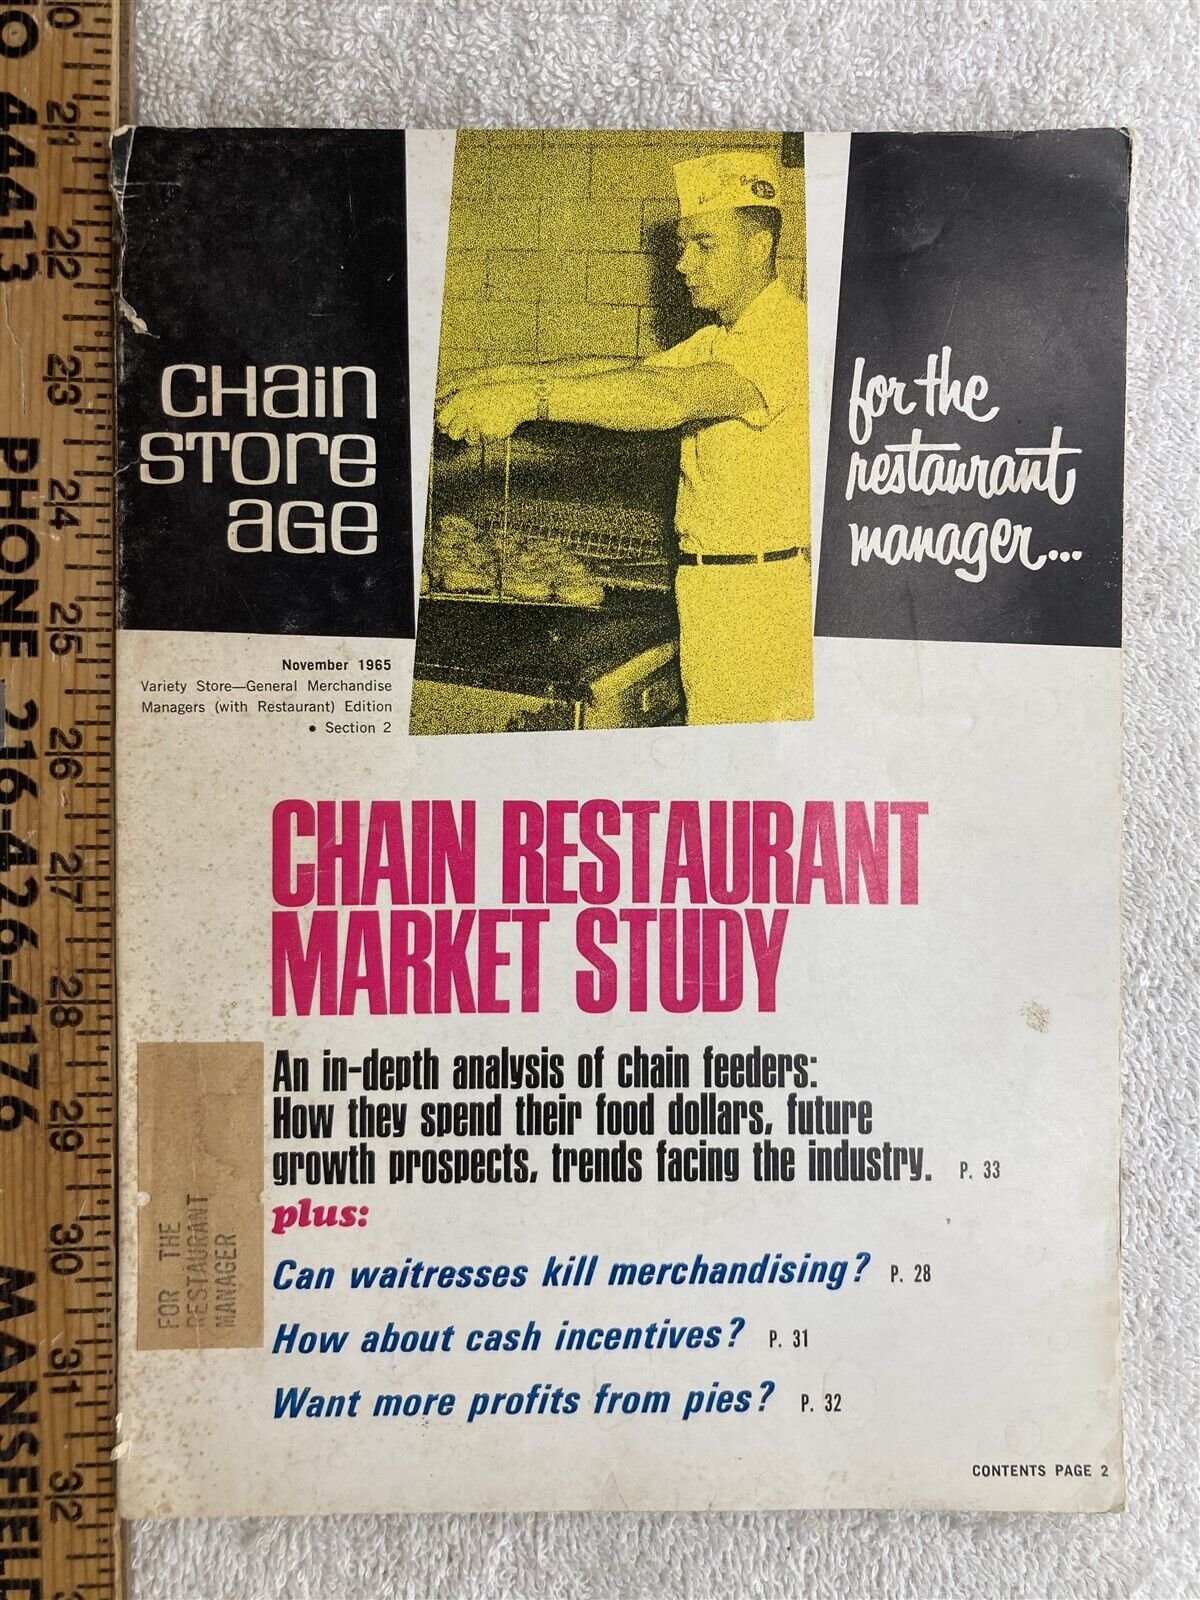 1965 November Chain Store Age Magazine Vintage Restaurant Manager Edition Sect 2